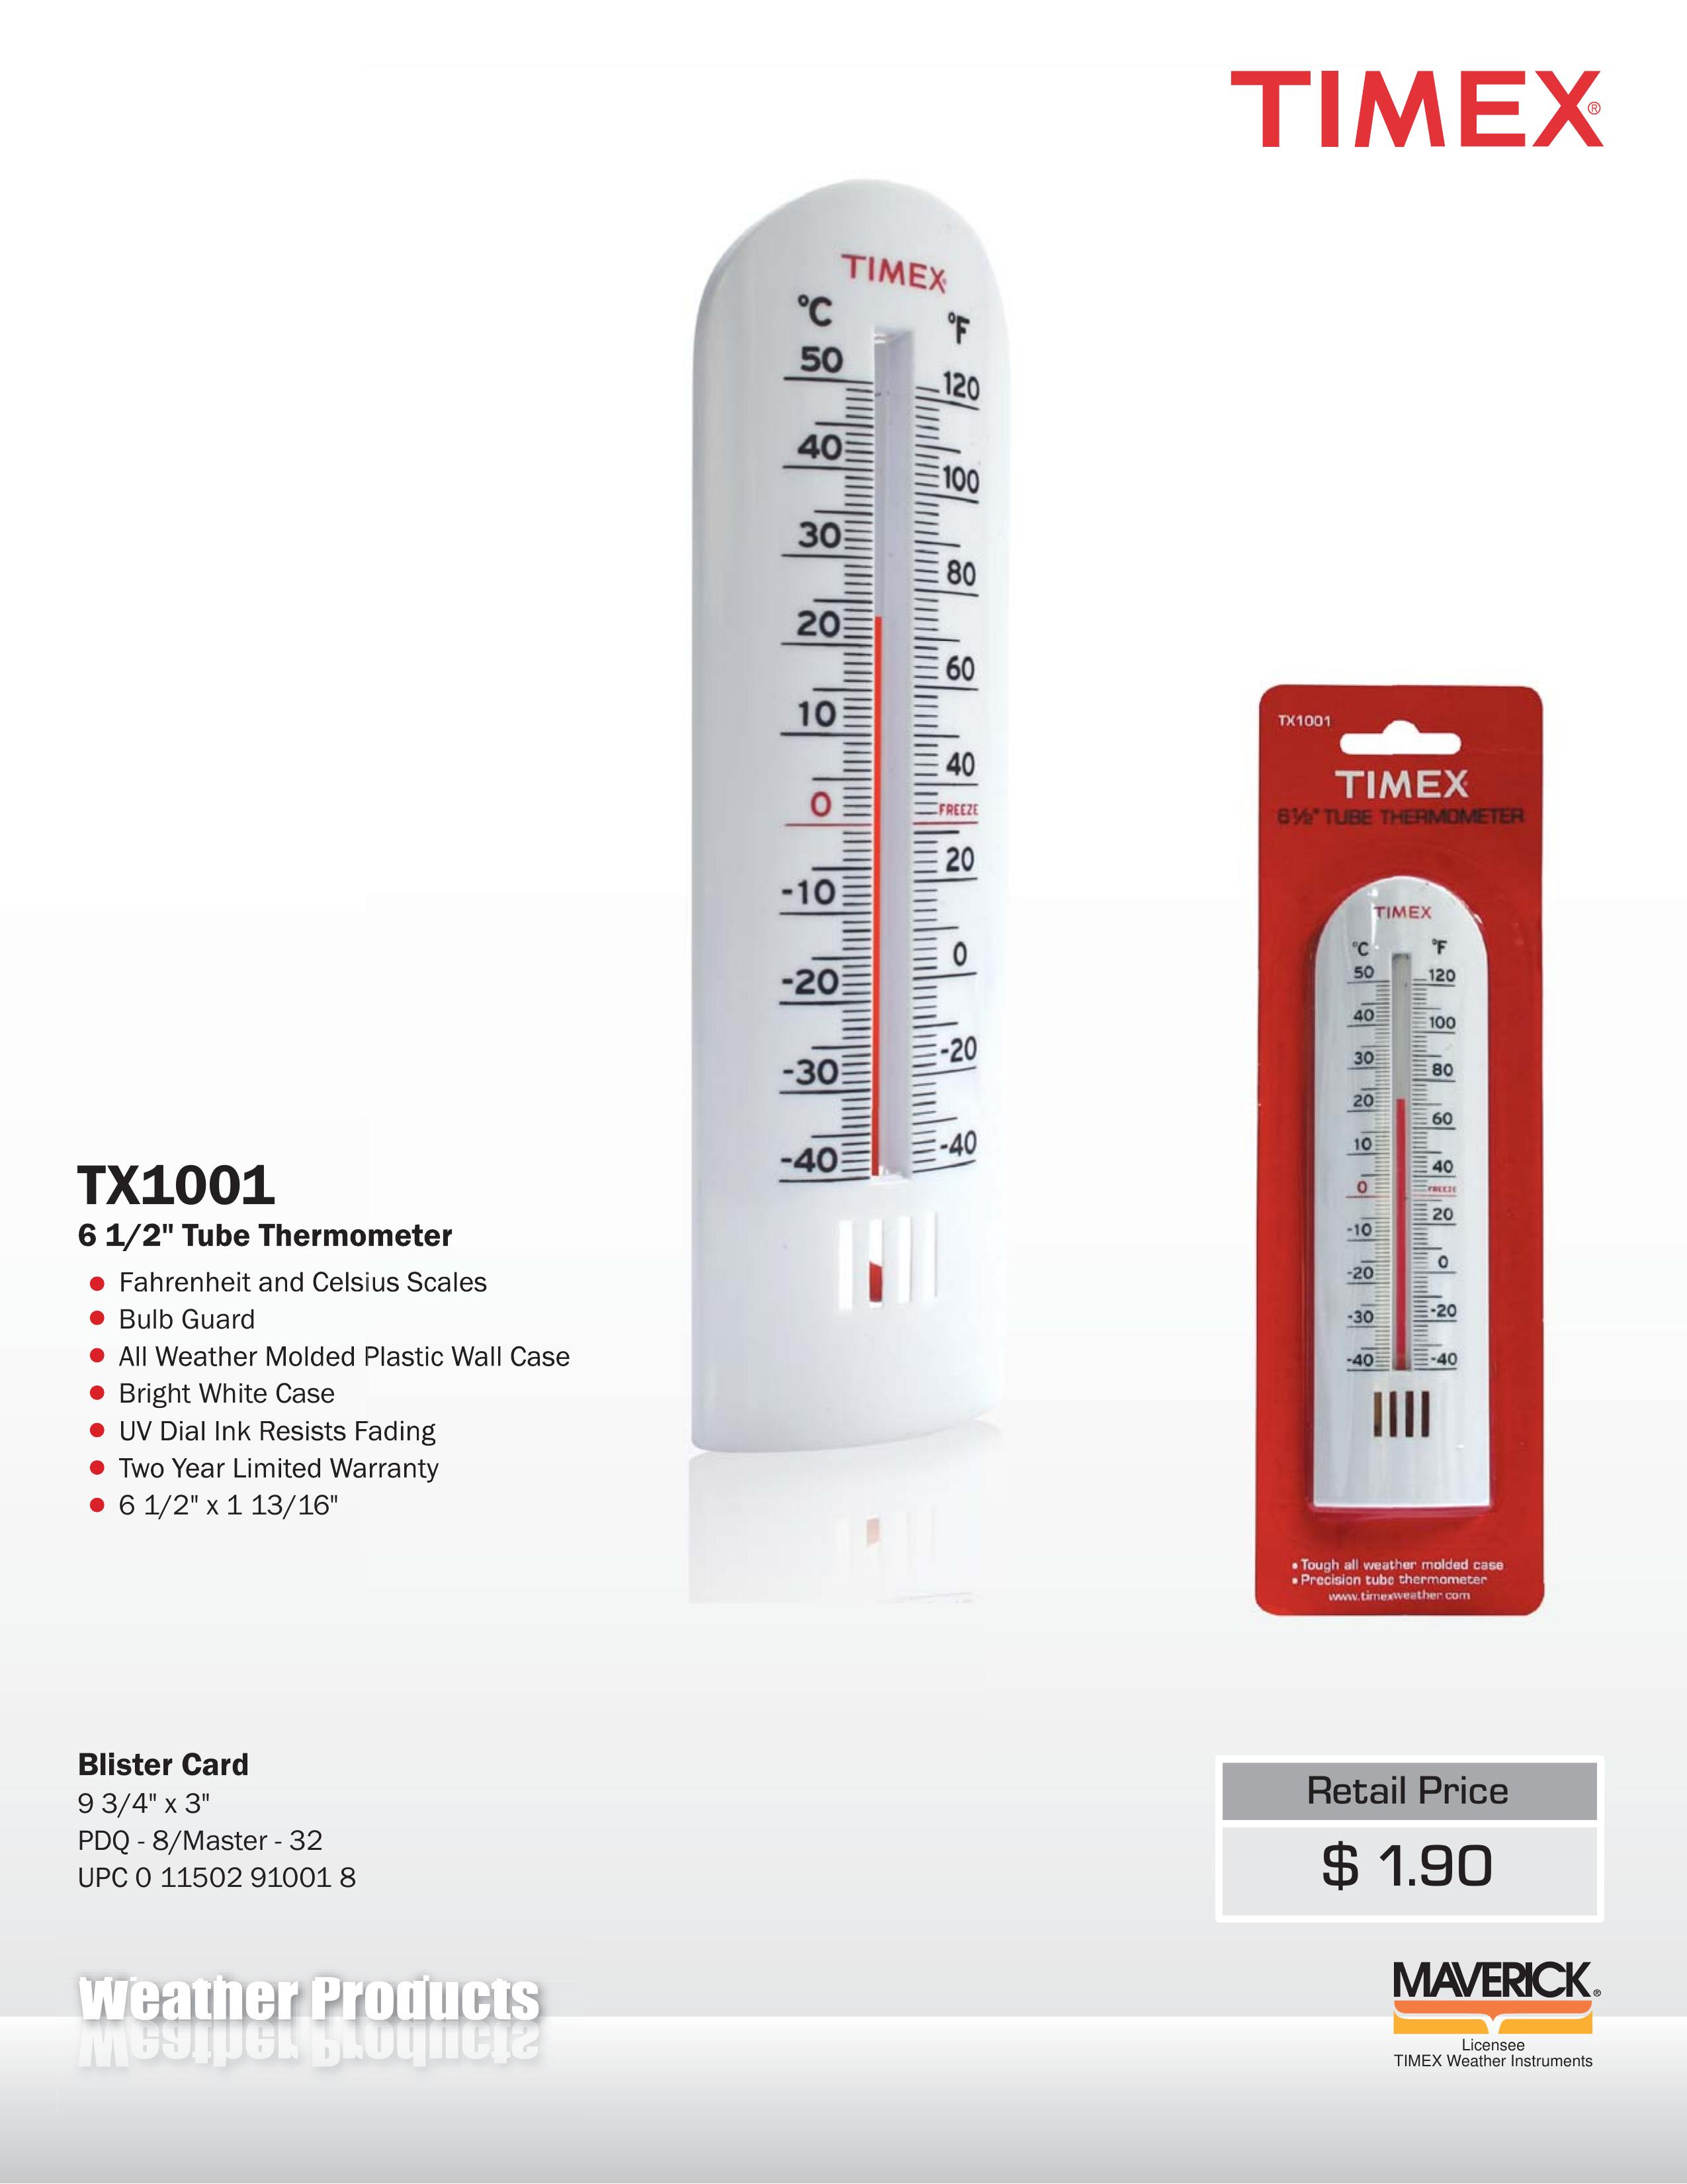 TIMEX Weather Products TX1001 Thermometer User Manual